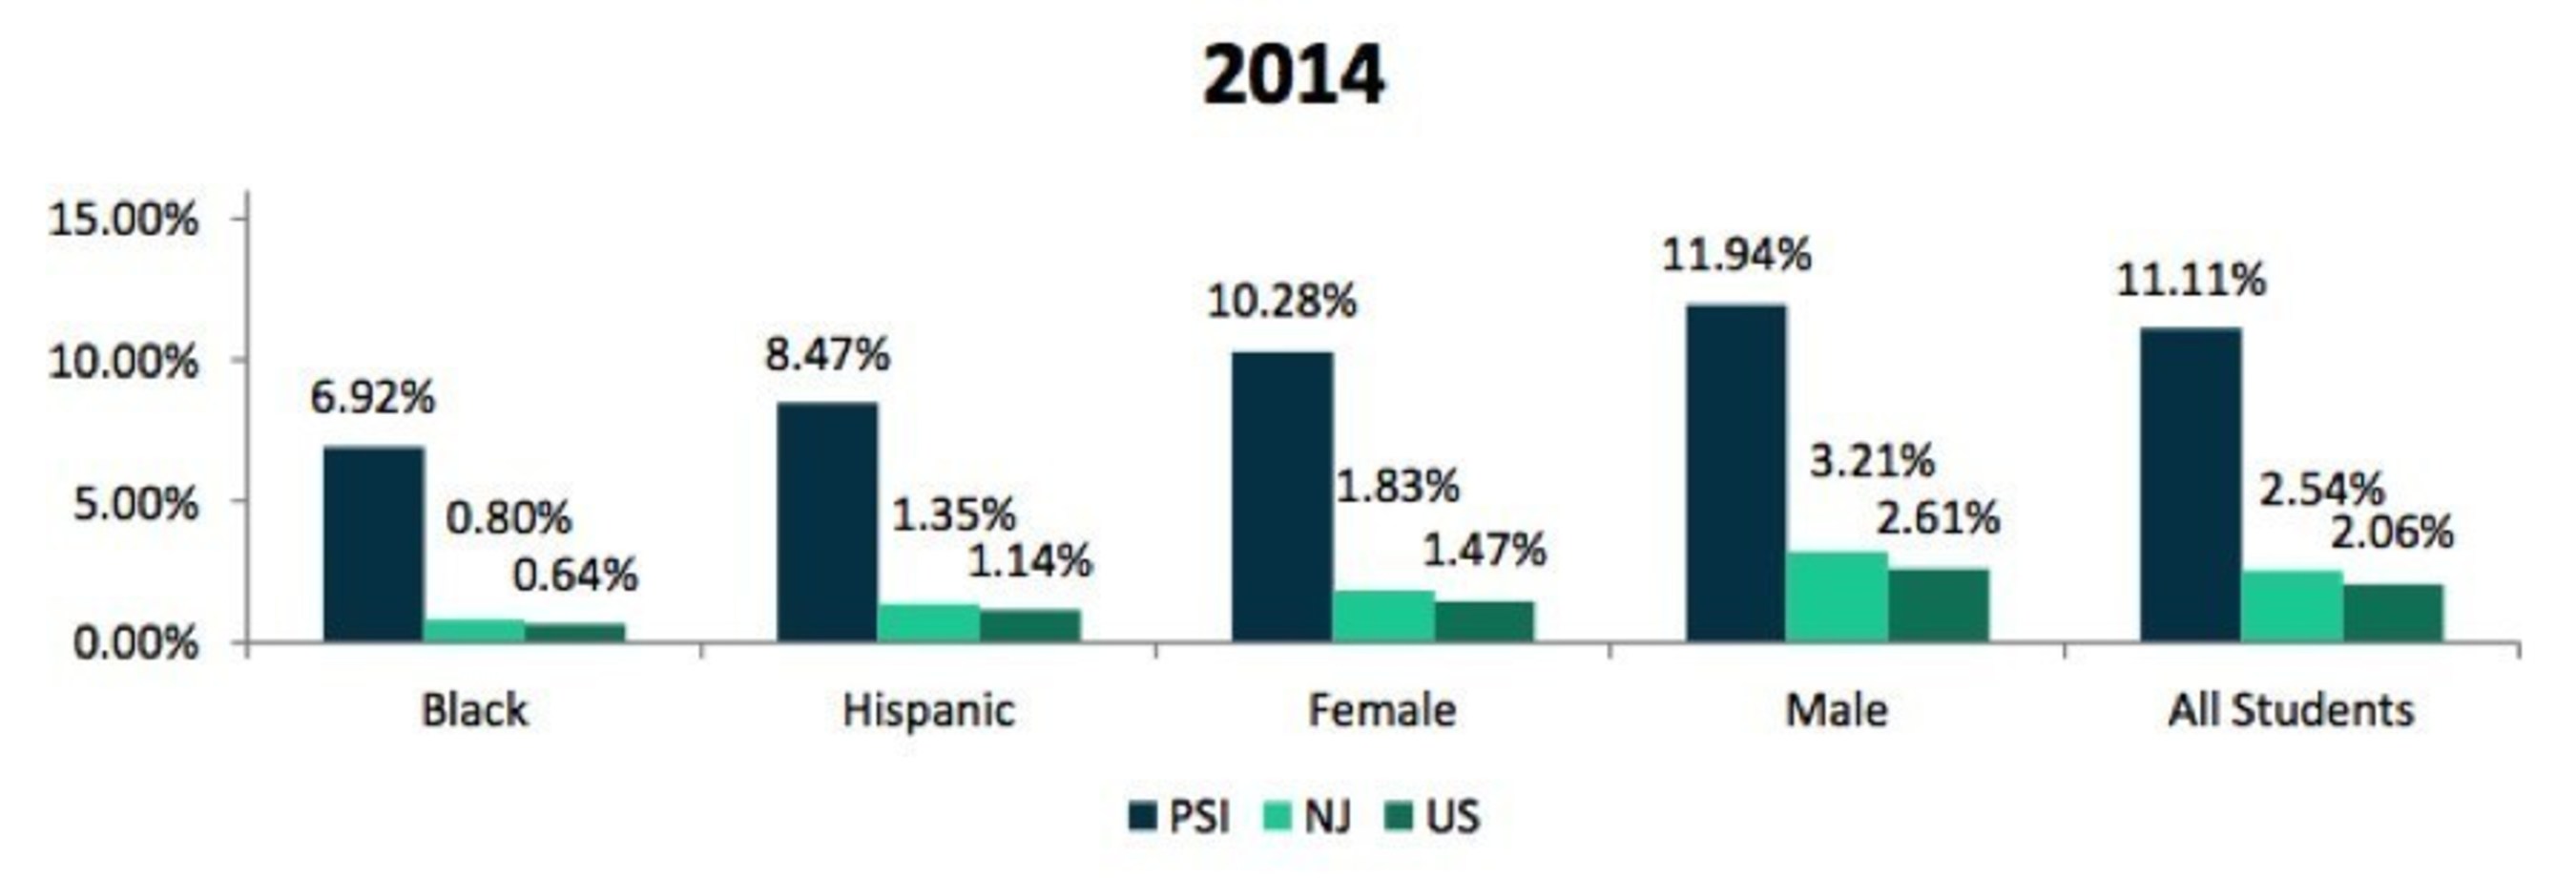 Comparison of PSI, NJ, and US Student Participation Rates, AP Physics, 2014. Source: The College Board, US Census Bureau, and NJDOE.